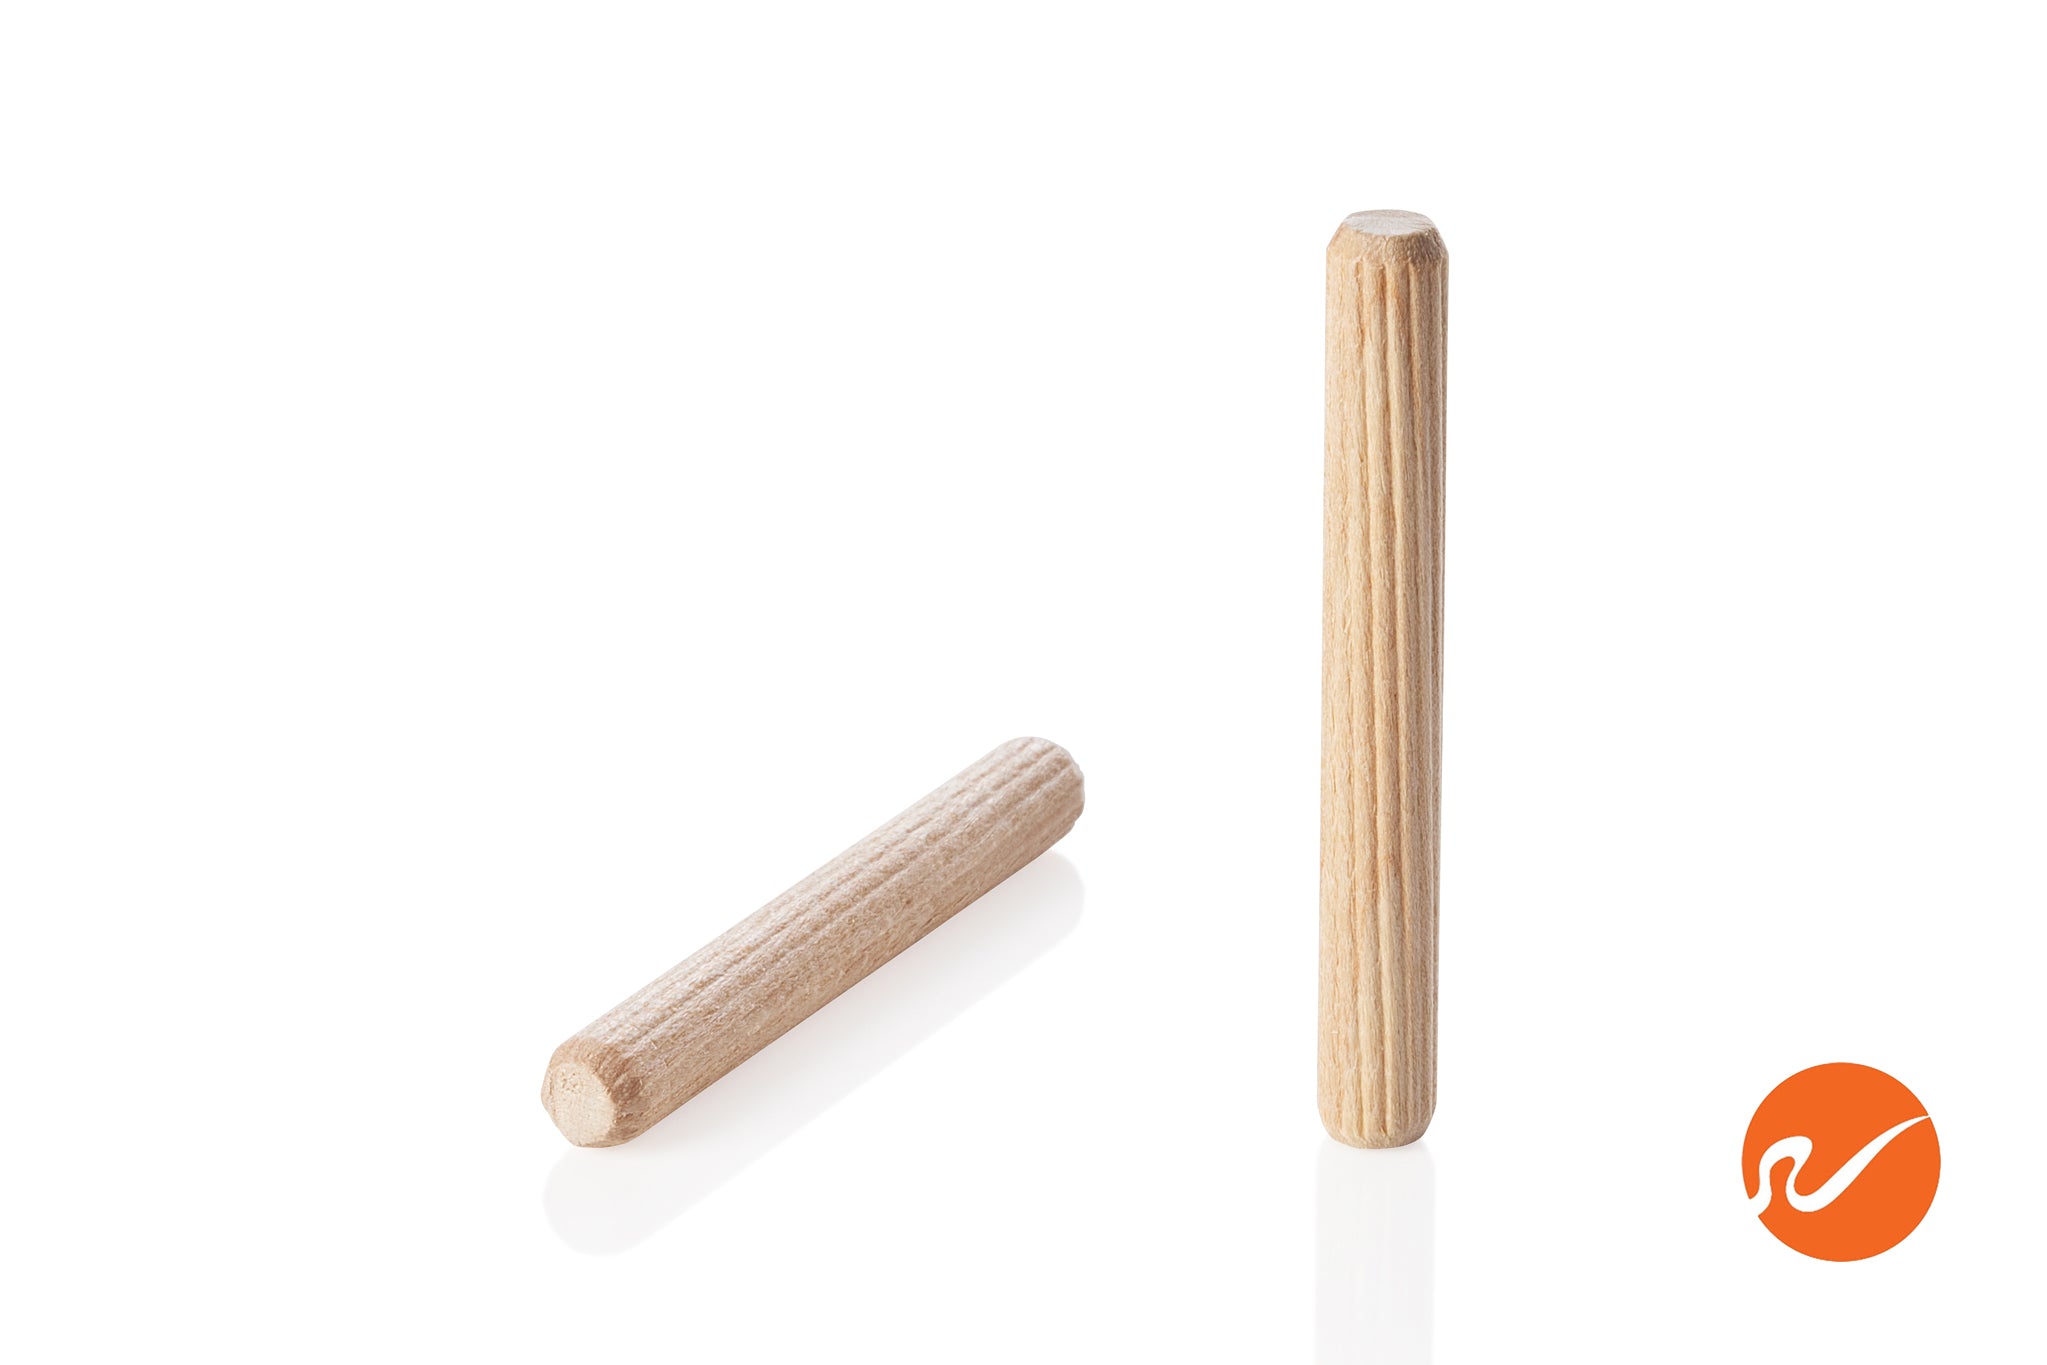  Wooden Dowel Pins Approx 1/4” 5/16” 3/8 (6mm 8mm 10mm) Wooden  dowls Dried Fluted and Beveled, Made of Hardwood (6*30+8*40+10*40-500PCS) :  Arts, Crafts & Sewing